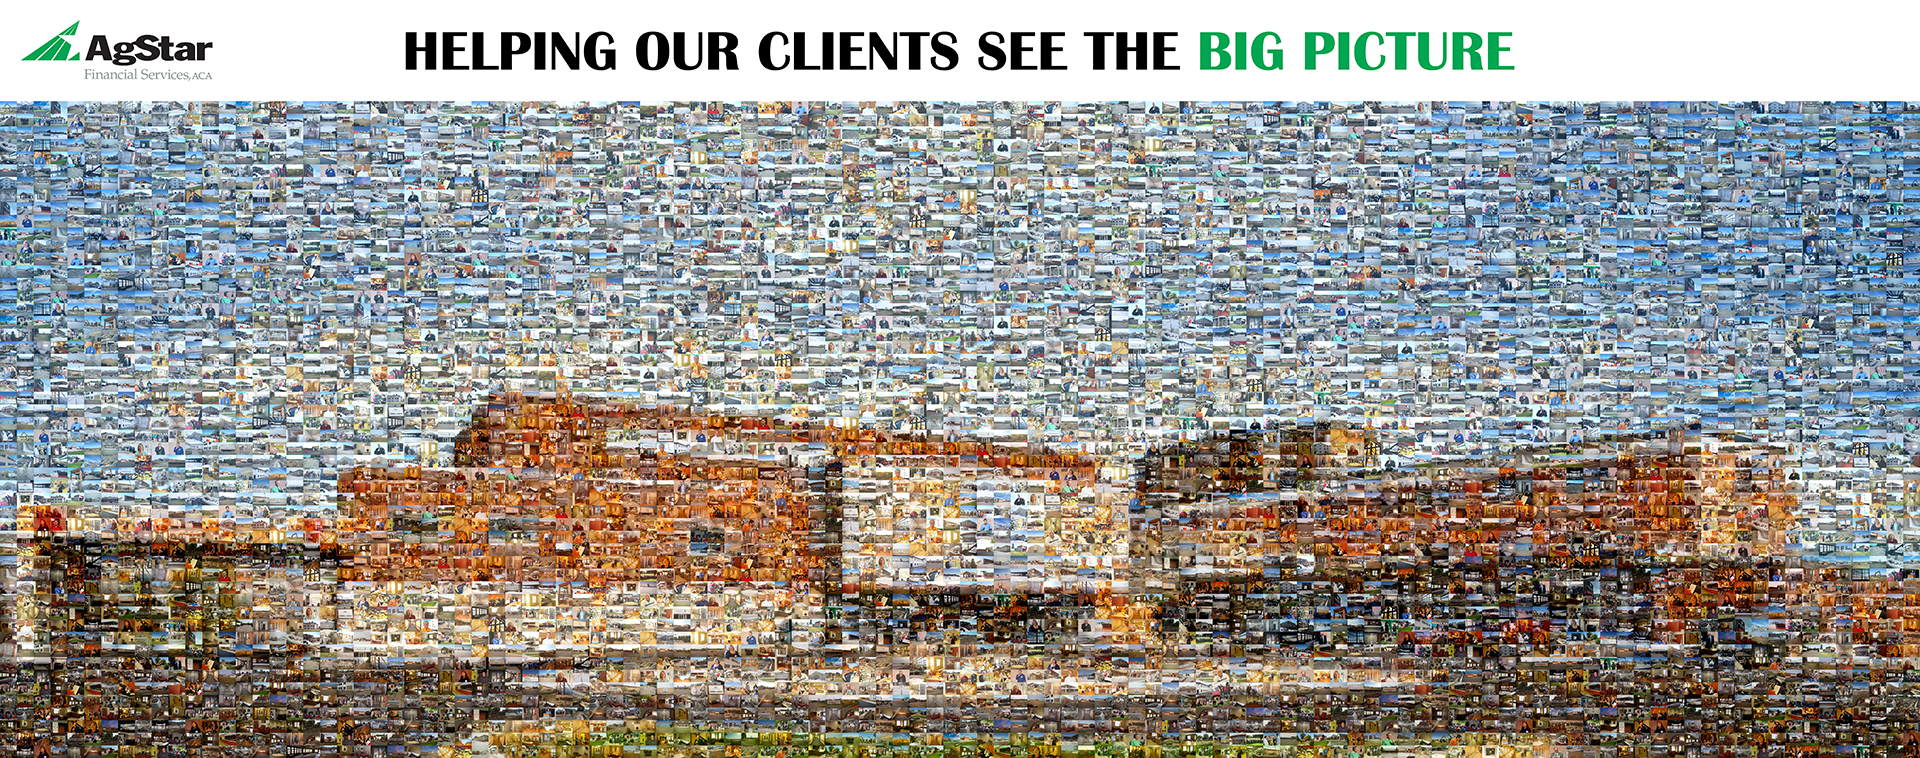 photo mosaic this Agstar Financial Services mural was designed using over 400 company photos